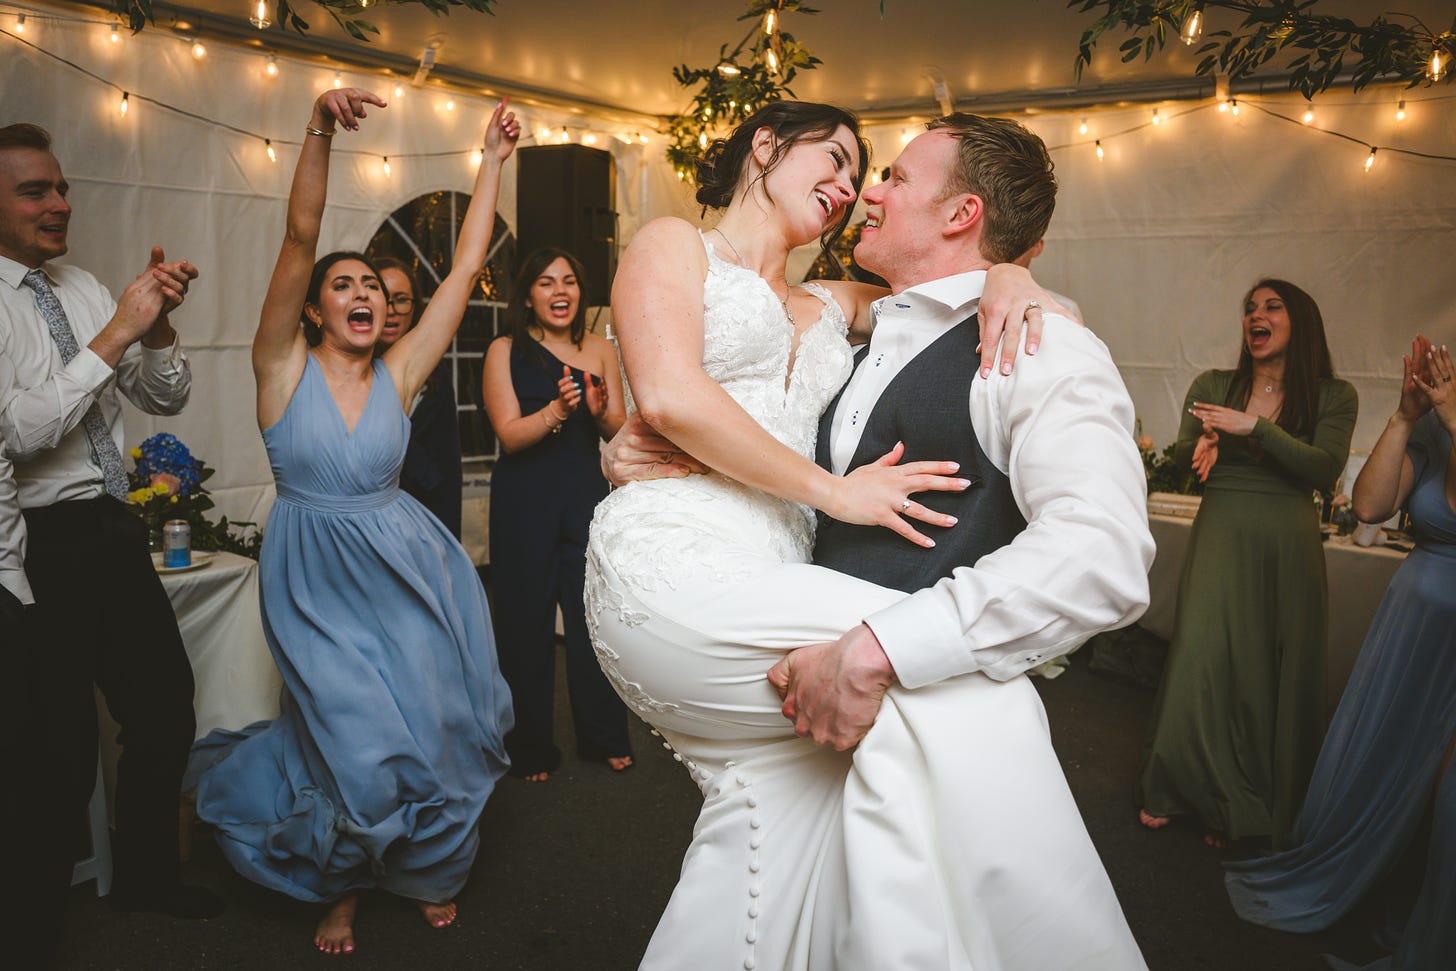 A groom lifts his bride while wedding guests celebrate behind them